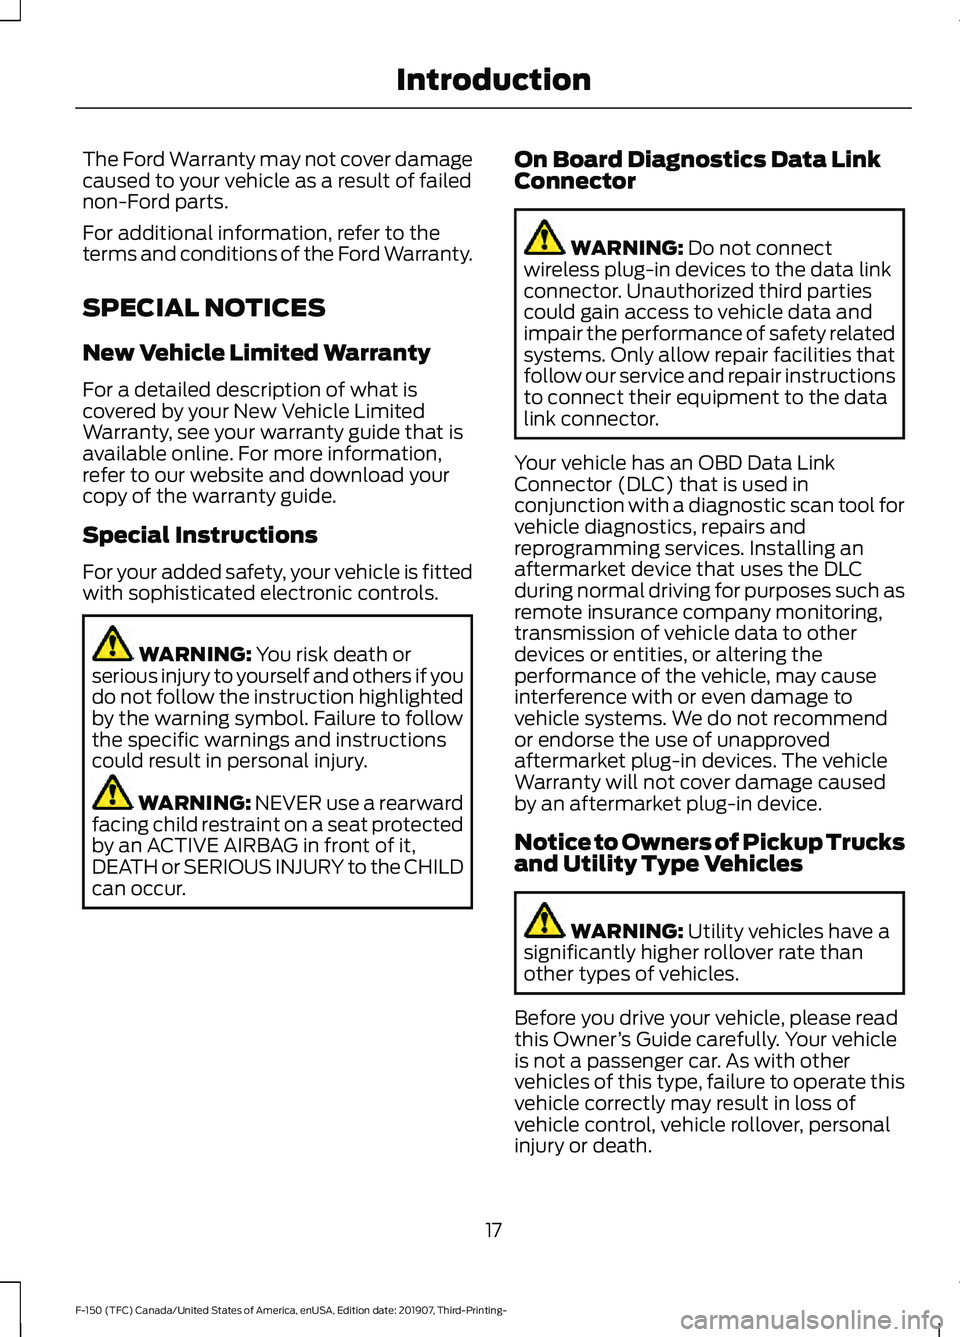 FORD F-150 2020  Owners Manual The Ford Warranty may not cover damage
caused to your vehicle as a result of failed
non-Ford parts.
For additional information, refer to the
terms and conditions of the Ford Warranty.
SPECIAL NOTICES
